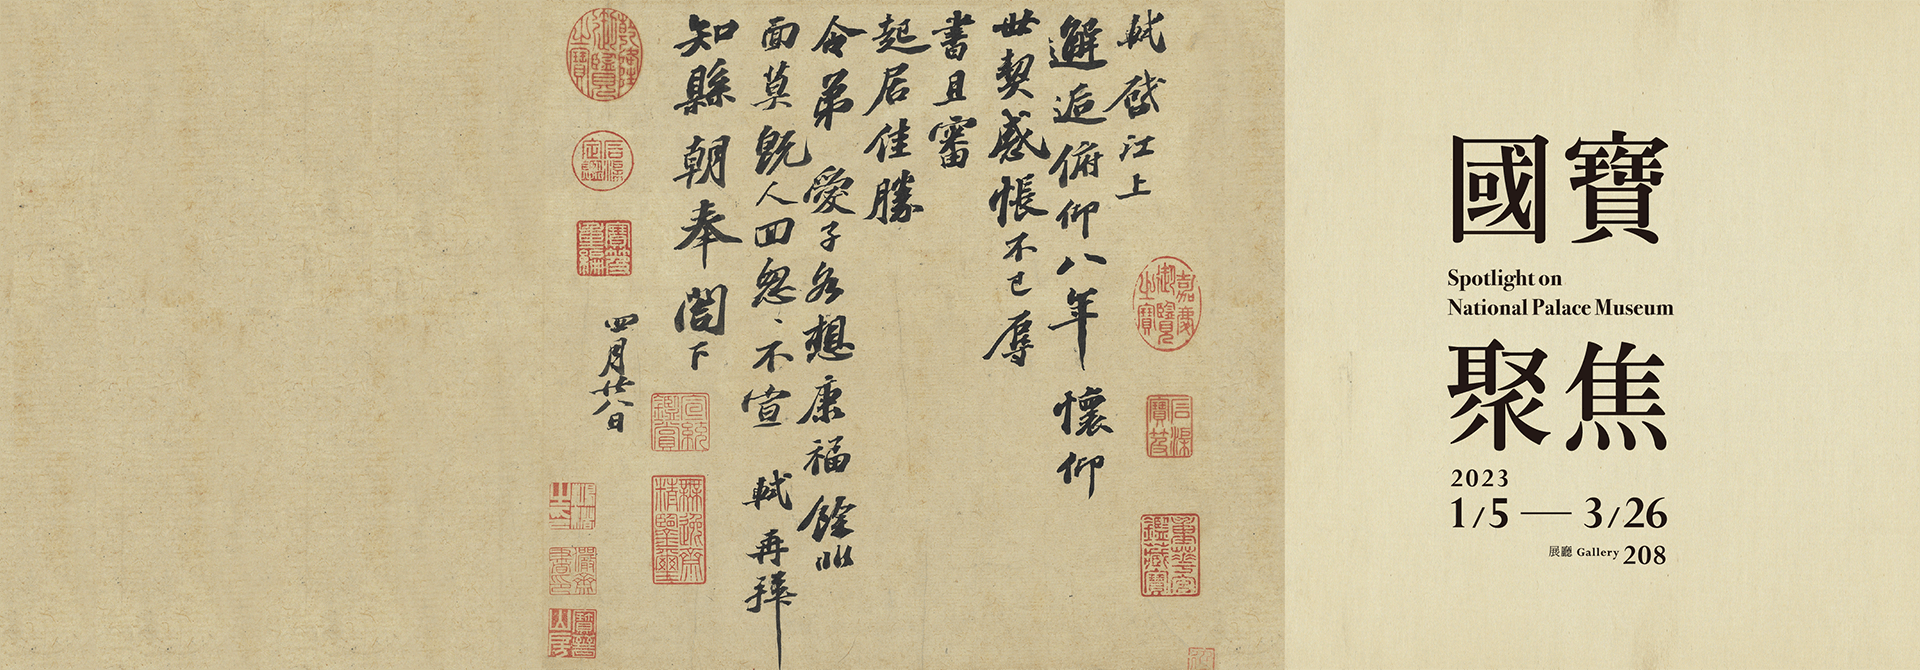 Spotlight on National Treasures, the Song dynasty literary giant Su Shi, “Letter to the Head County Magistrate, Gentleman in Service of the Court”